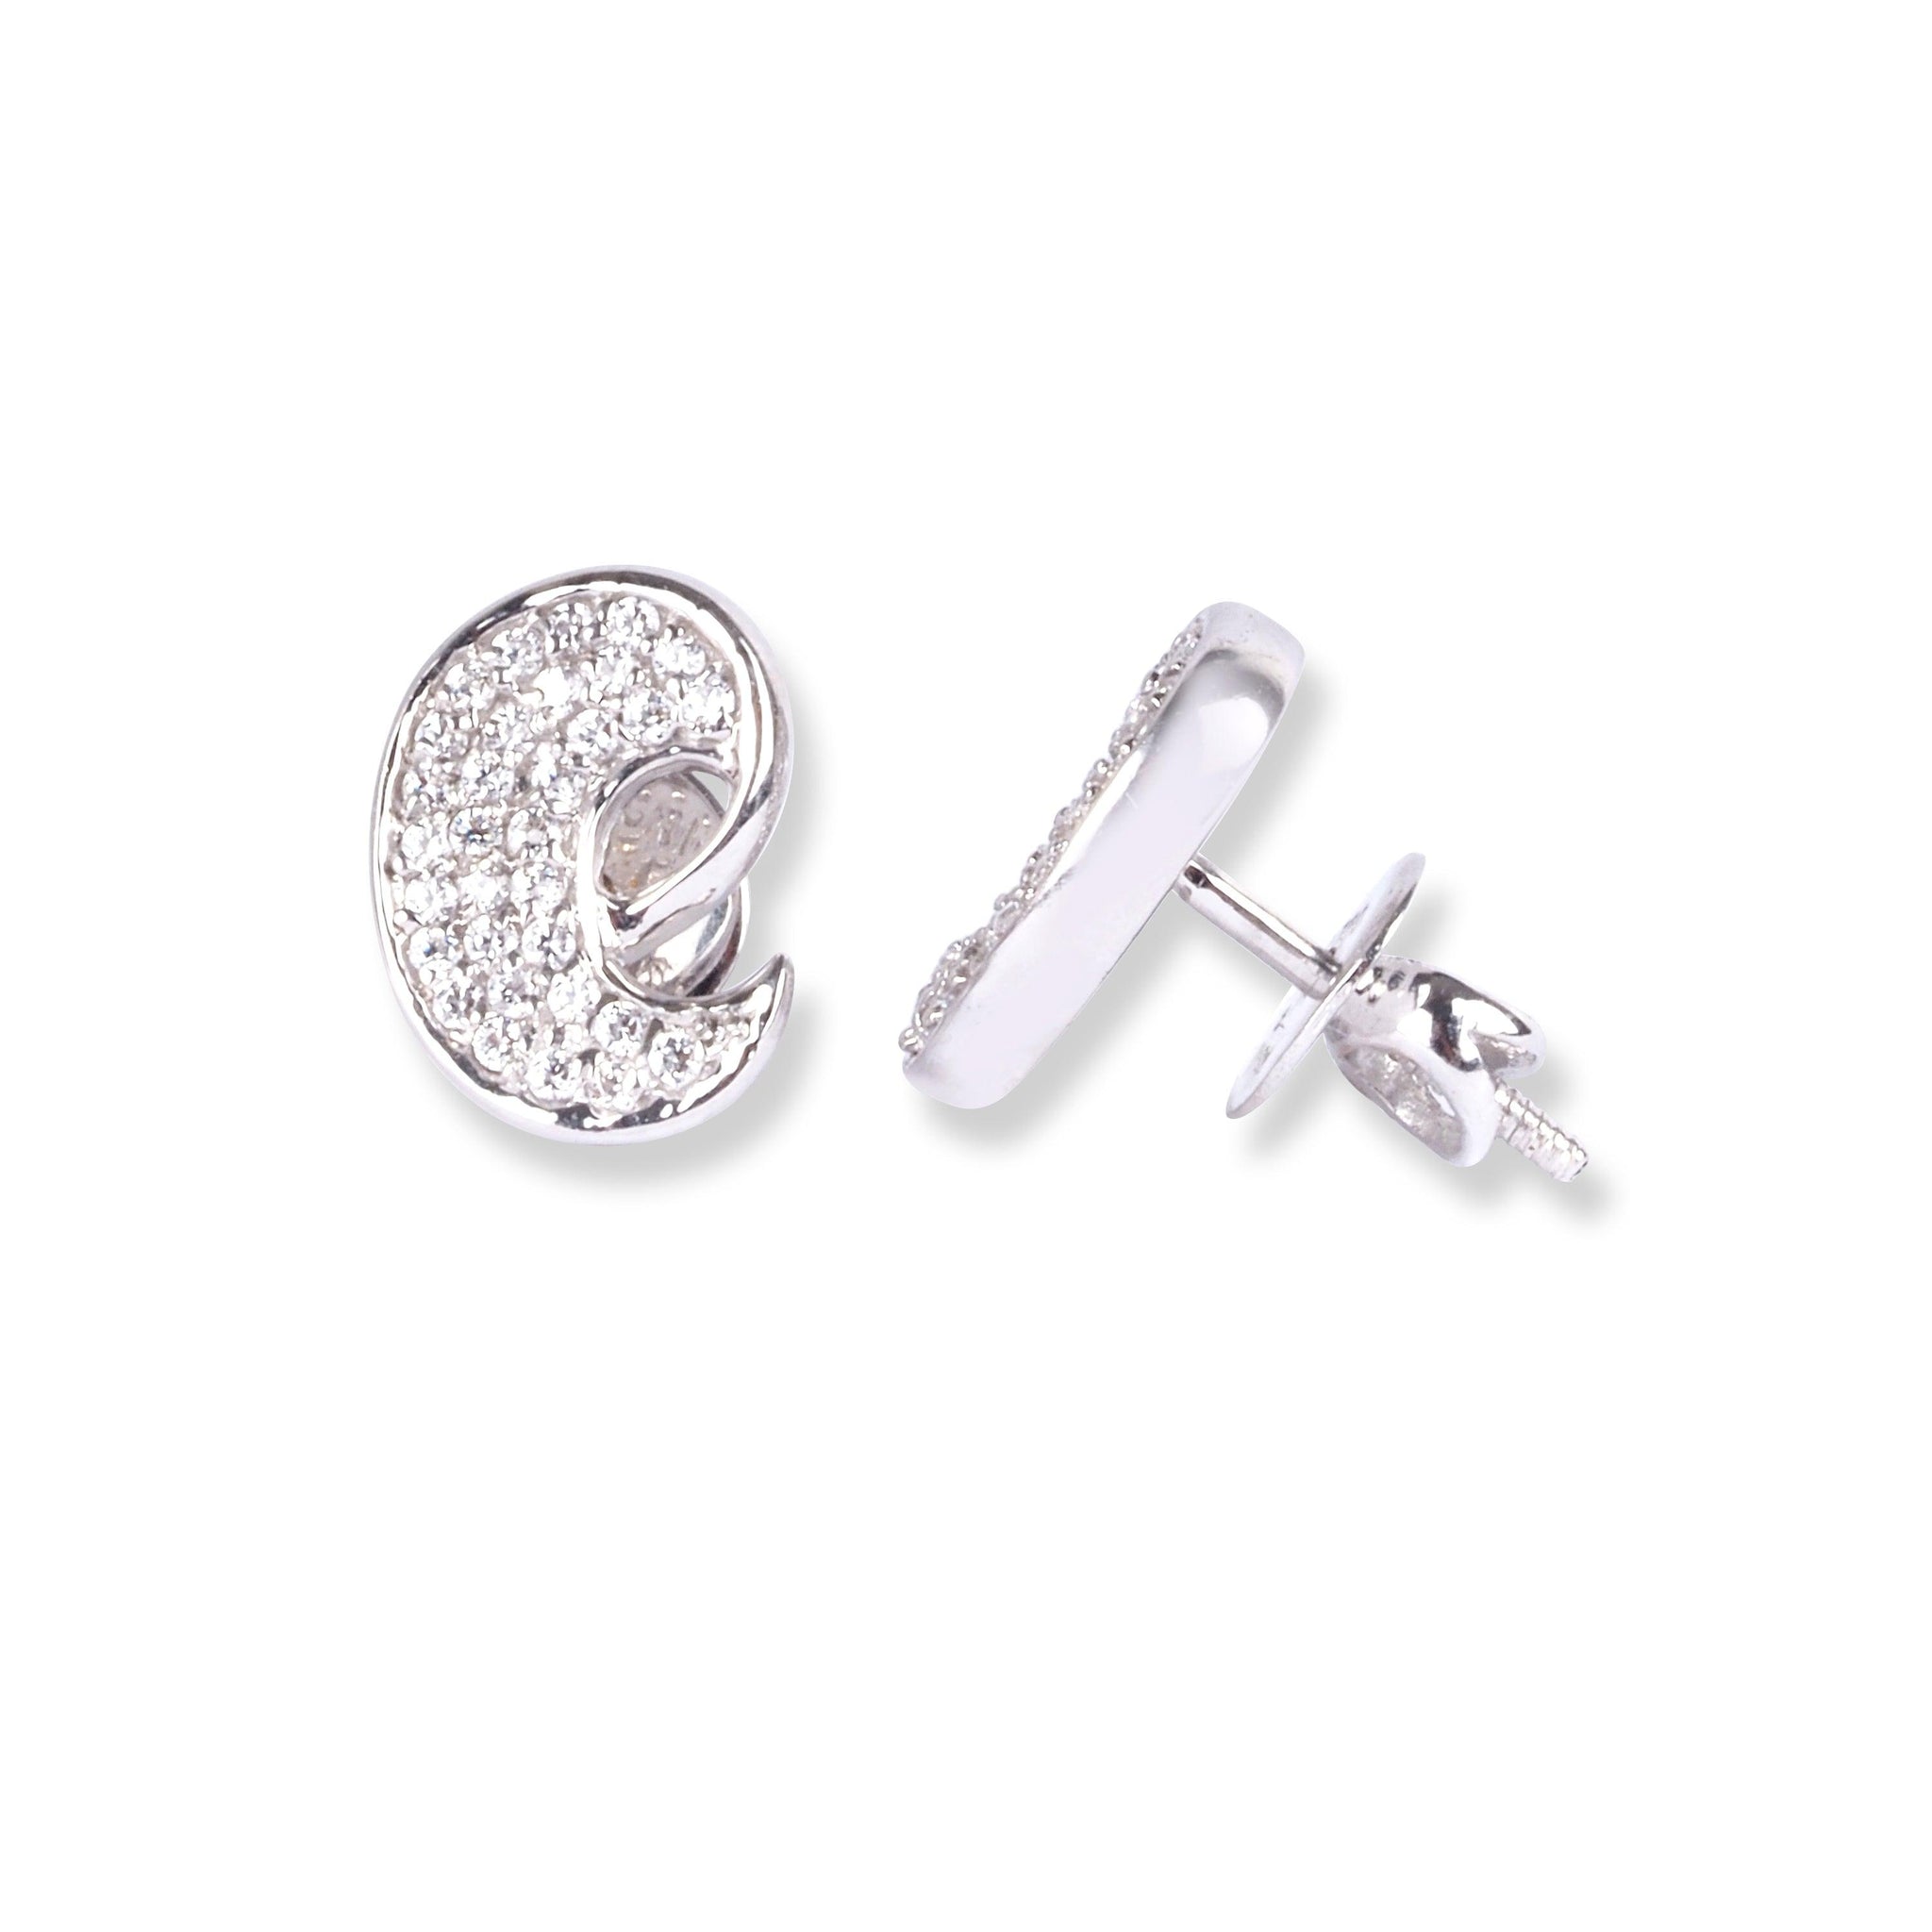 18ct White Gold Set with Cubic Zirconia Stones (Pendant + Chain + Stud Earrings)